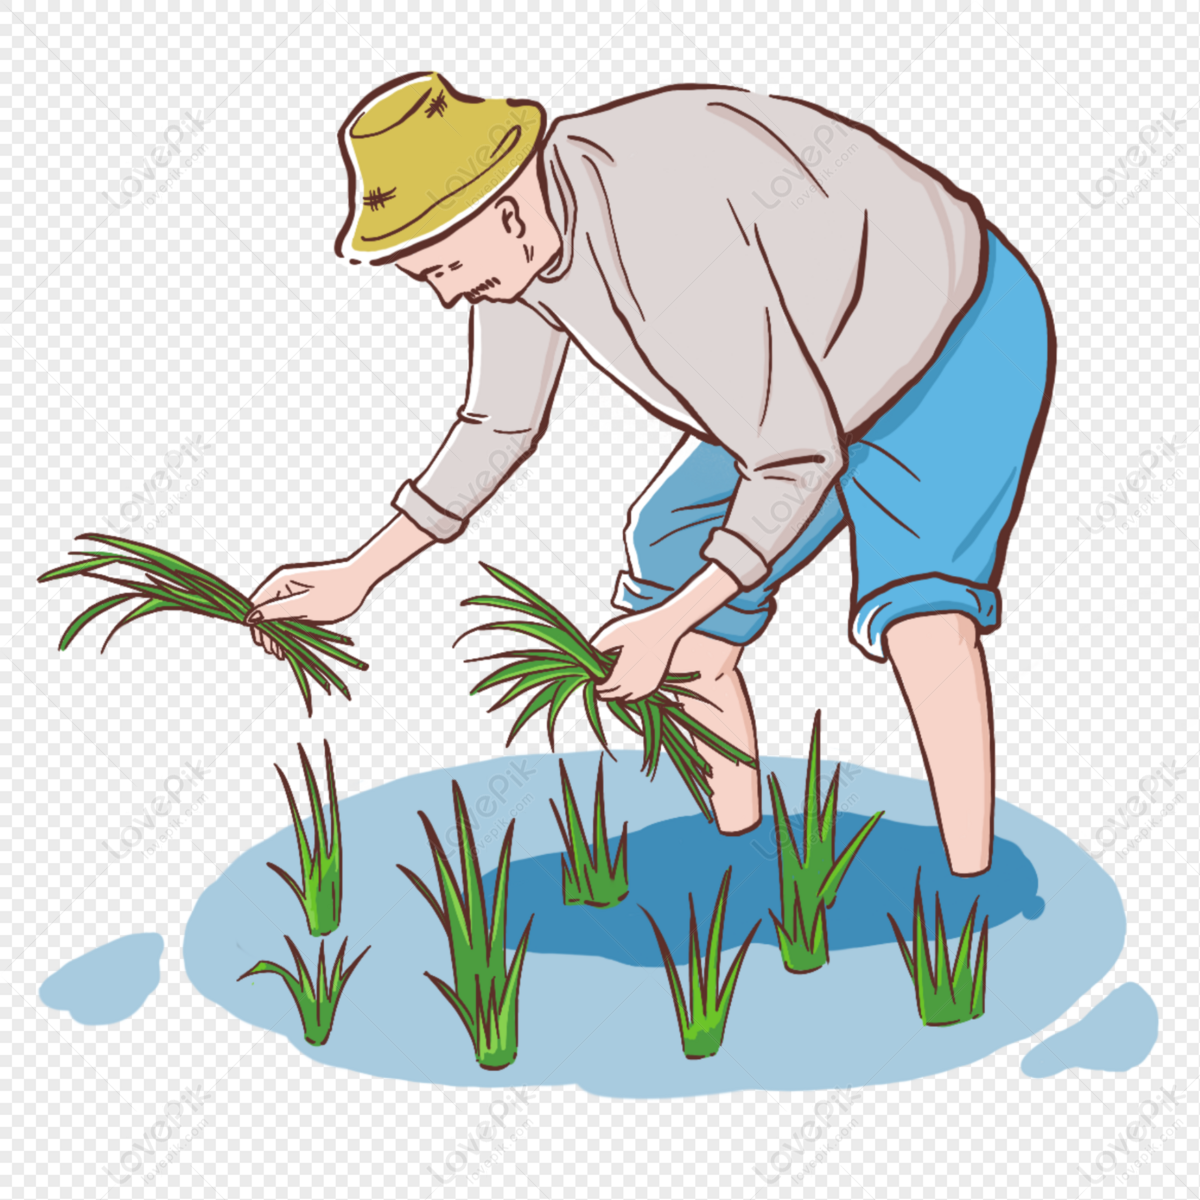 Image of Sketch Of Farmer Working With A Cow In A Agricultural Field And  Village Or Rural Environment Outline Editable Illustration-KM336011-Picxy